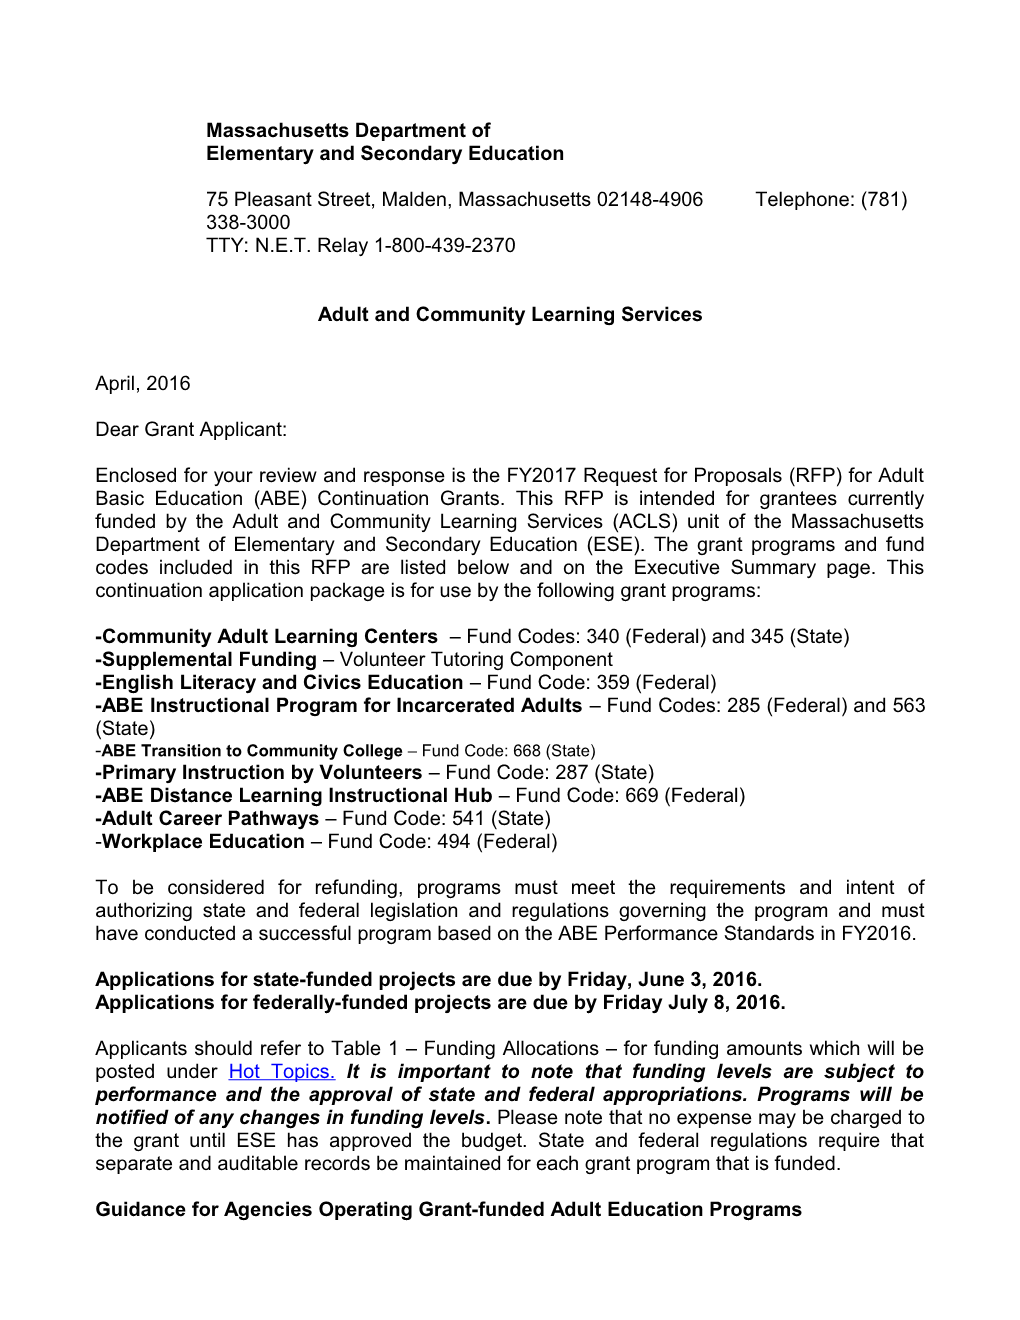 FY2017 Fund Code 359 ABE English Literacy and Civics Education Director Letter